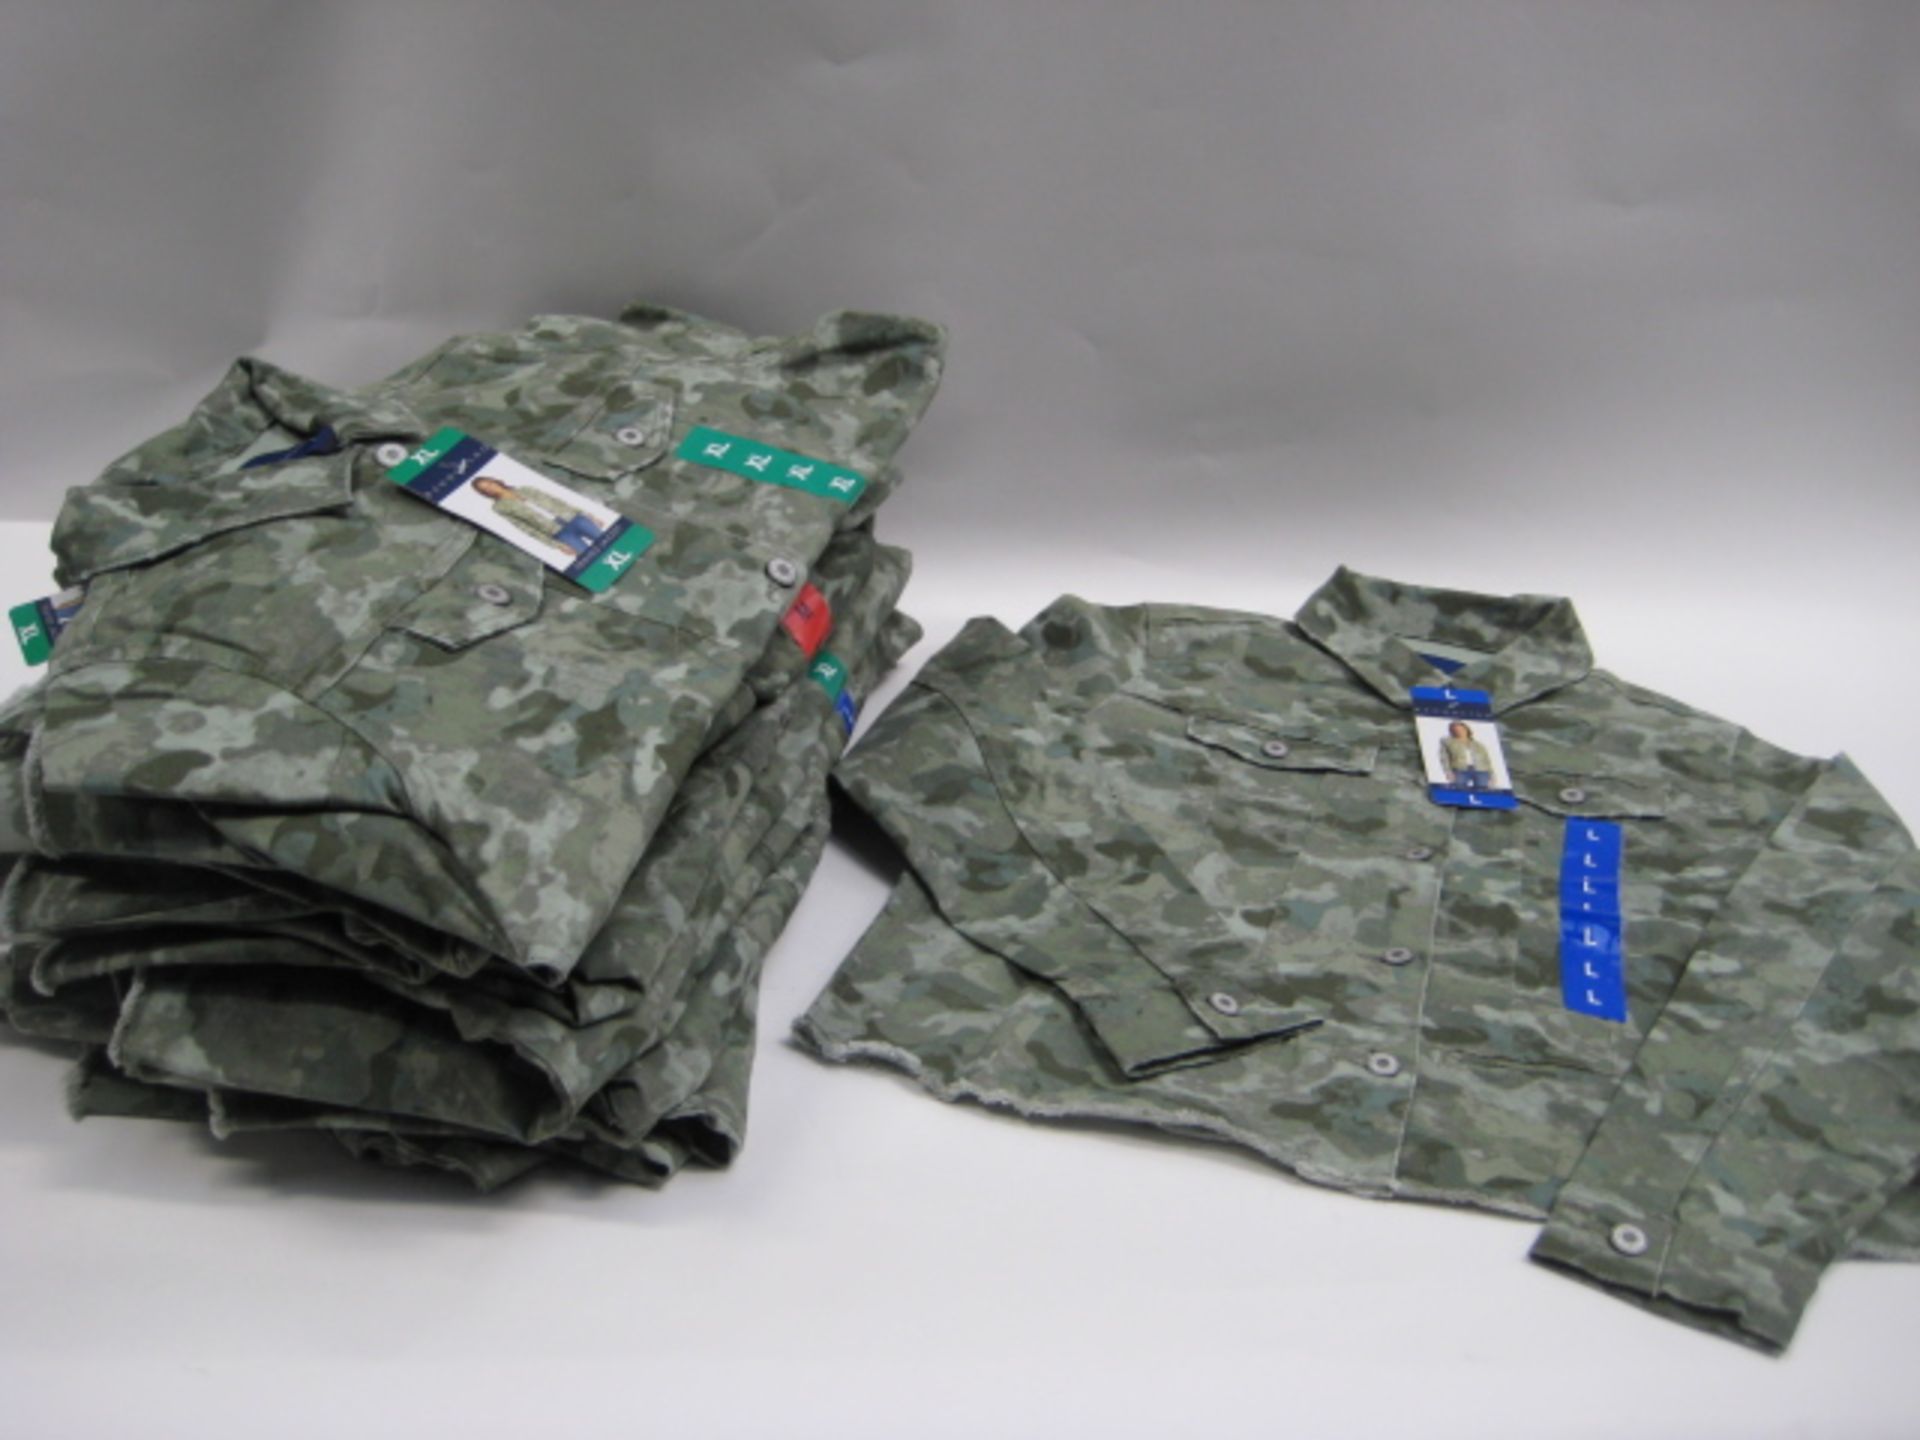 Bag containing 16 Bandolino frayed ladies jackets in camouflage, sizes ranging from M to XL